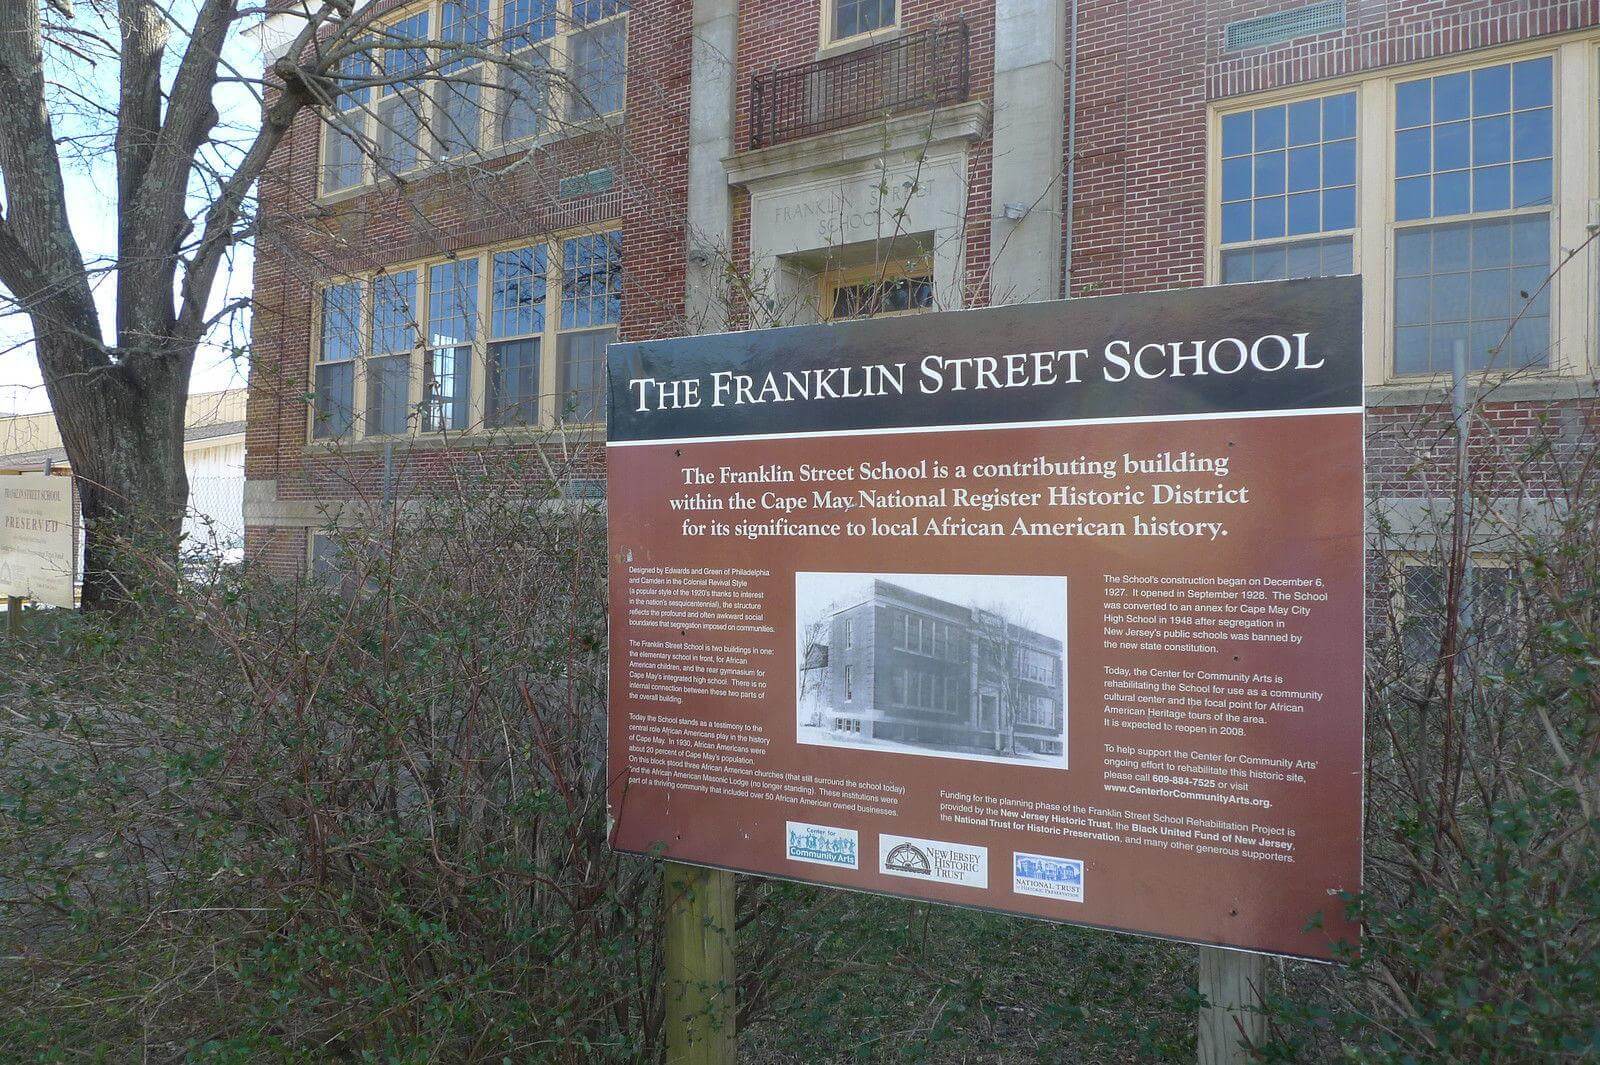 Cape May Scores $500K Federal Grant For Franklin Street School